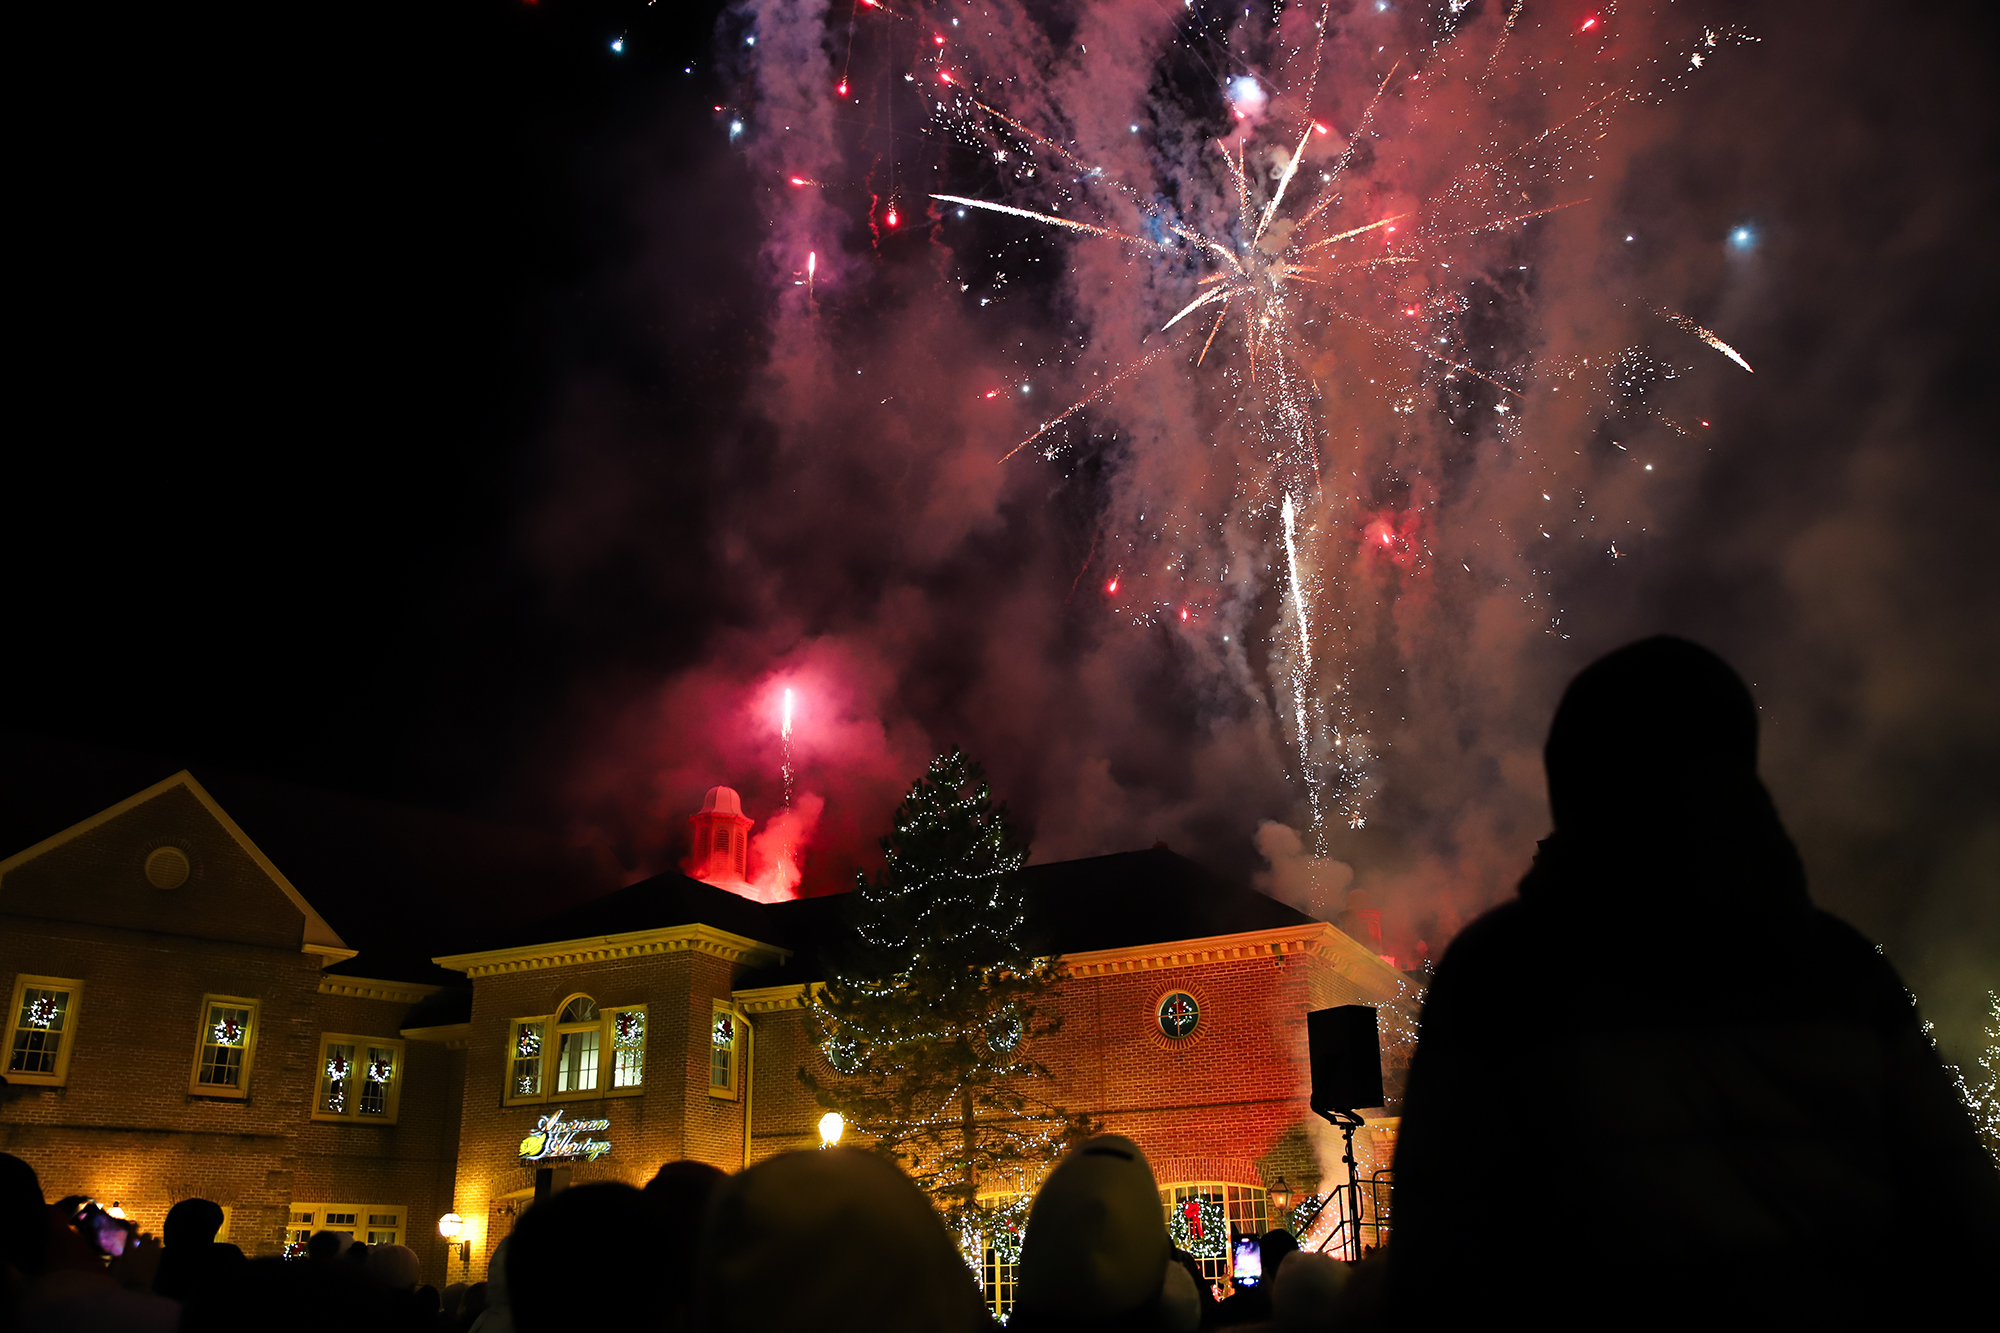 Fireworks display over American Heritage Branch Building